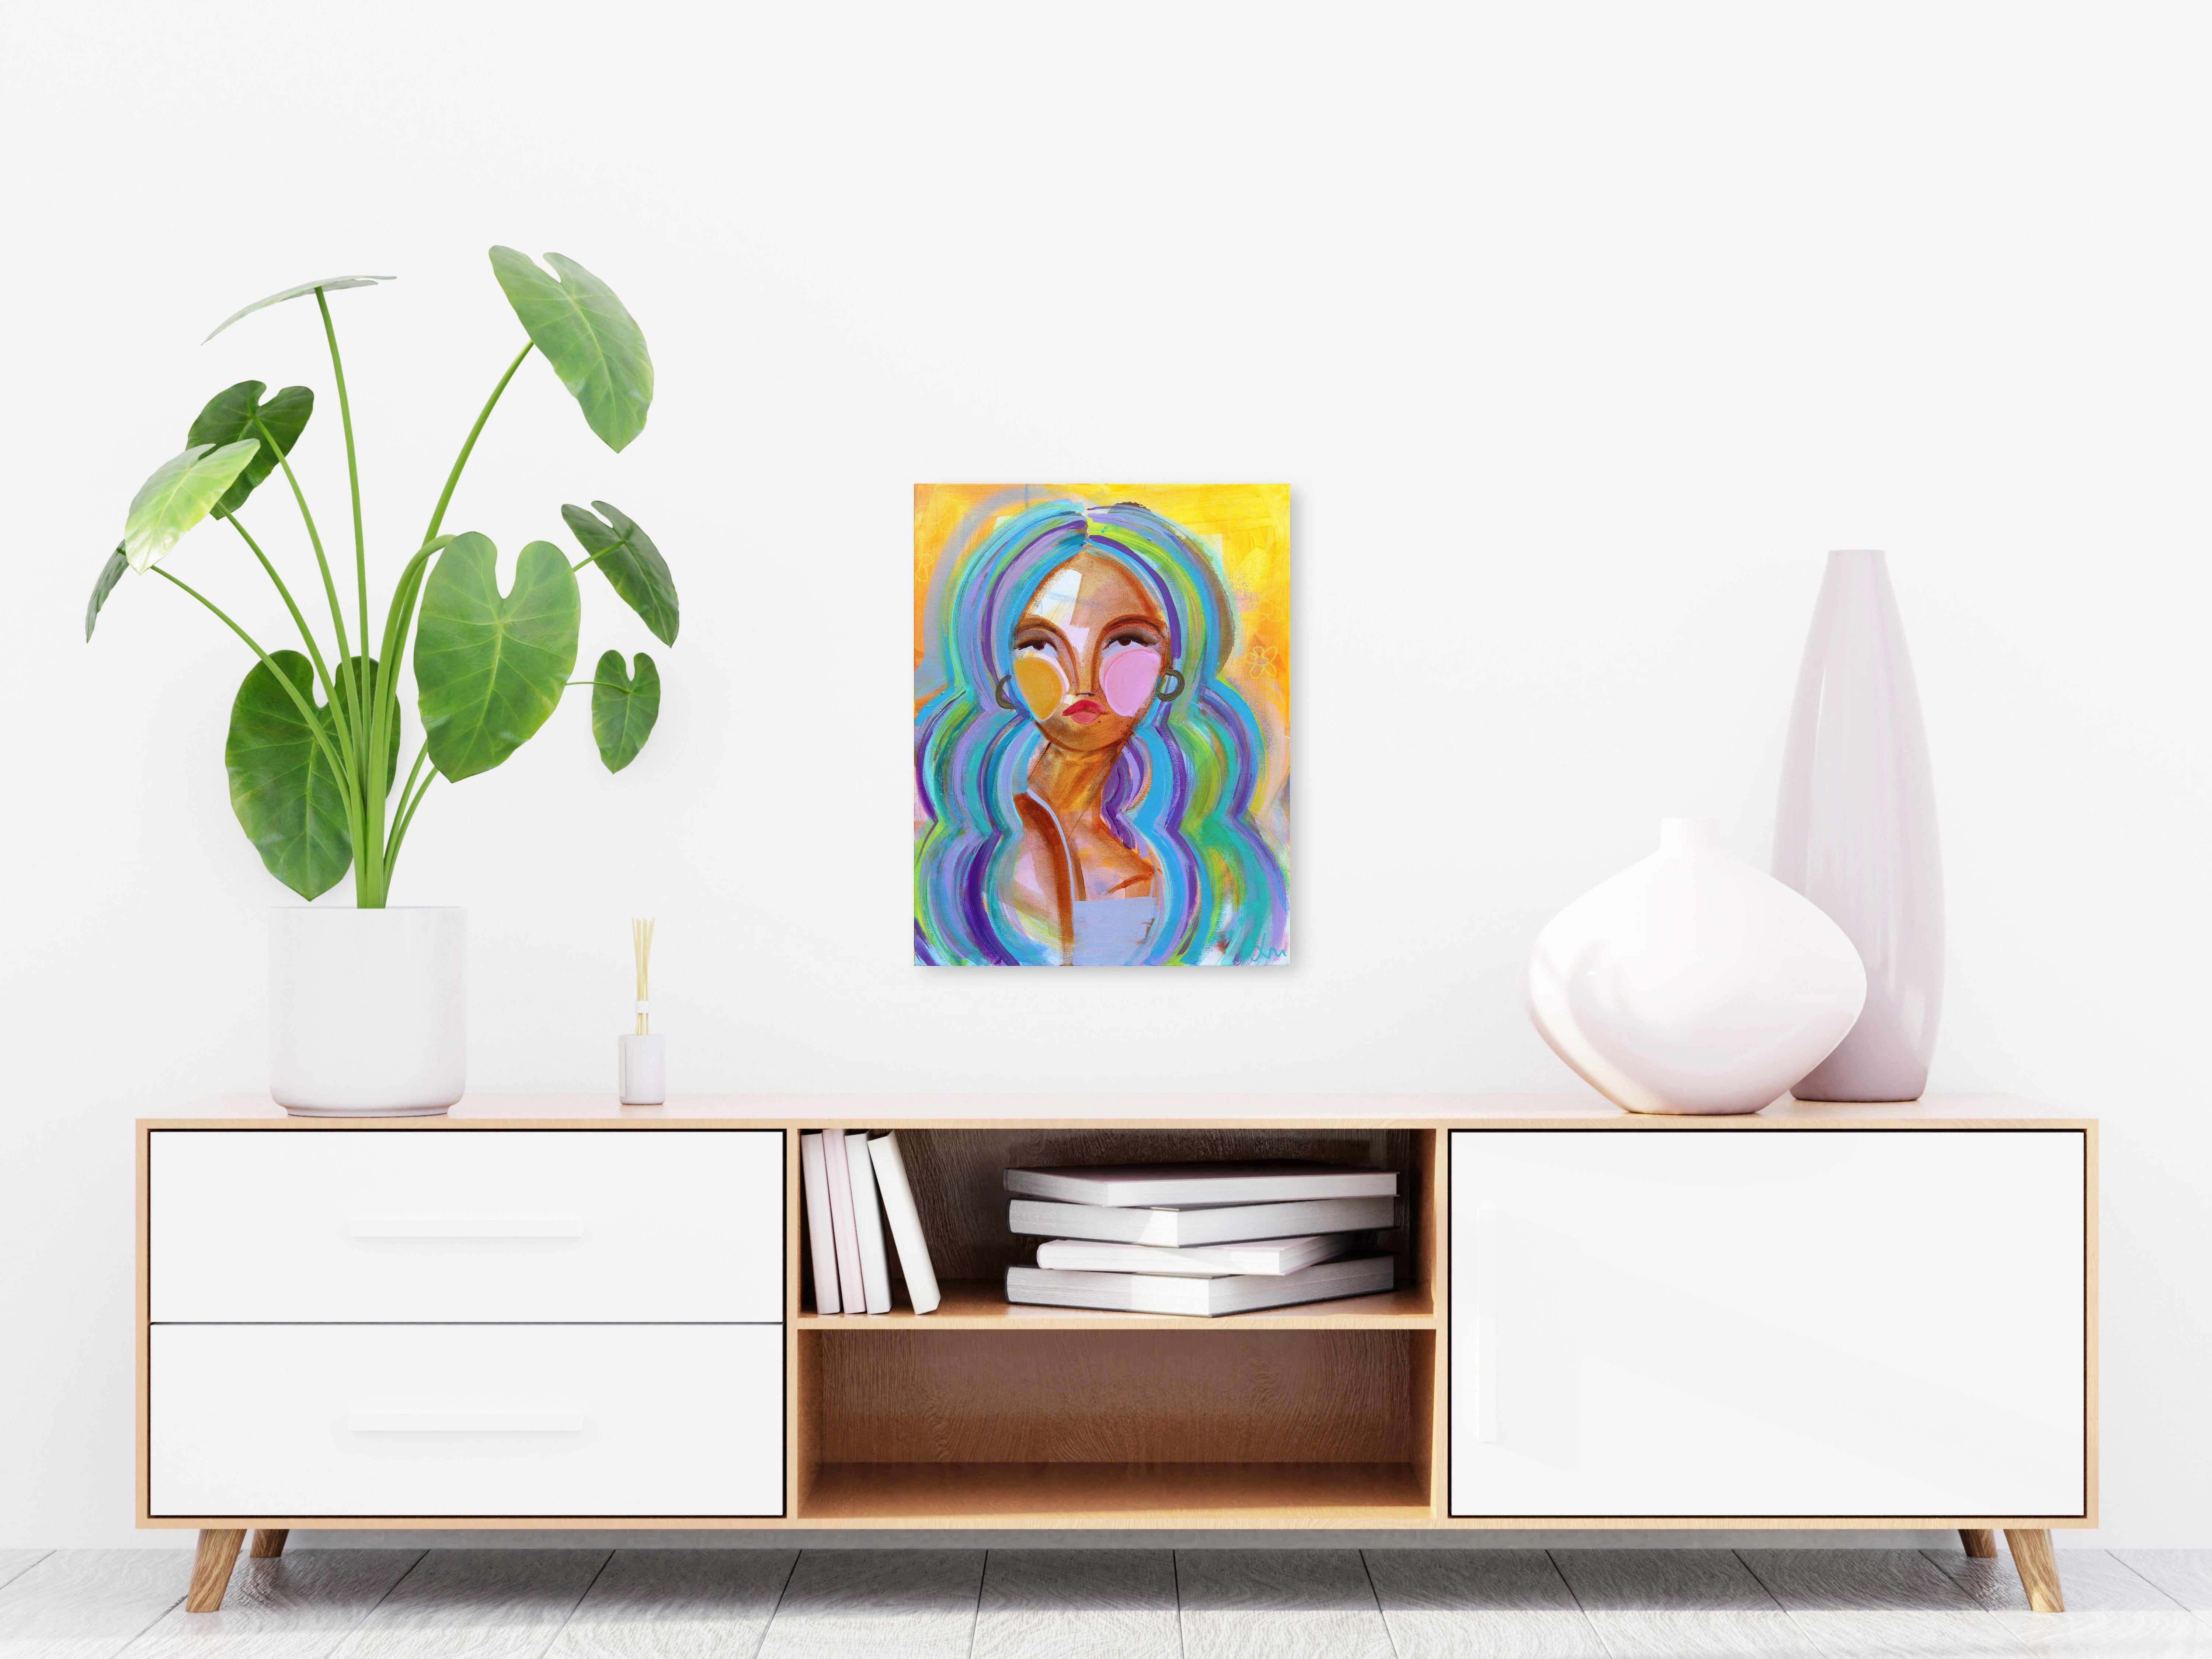 Inspired by her background in fashion, artist Lindsey McCord creates vibrant portraits that encapsulate the confidence that comes with the fun of being stylish and chic. Her figures have an open-minded expression while the vivid colors of her work